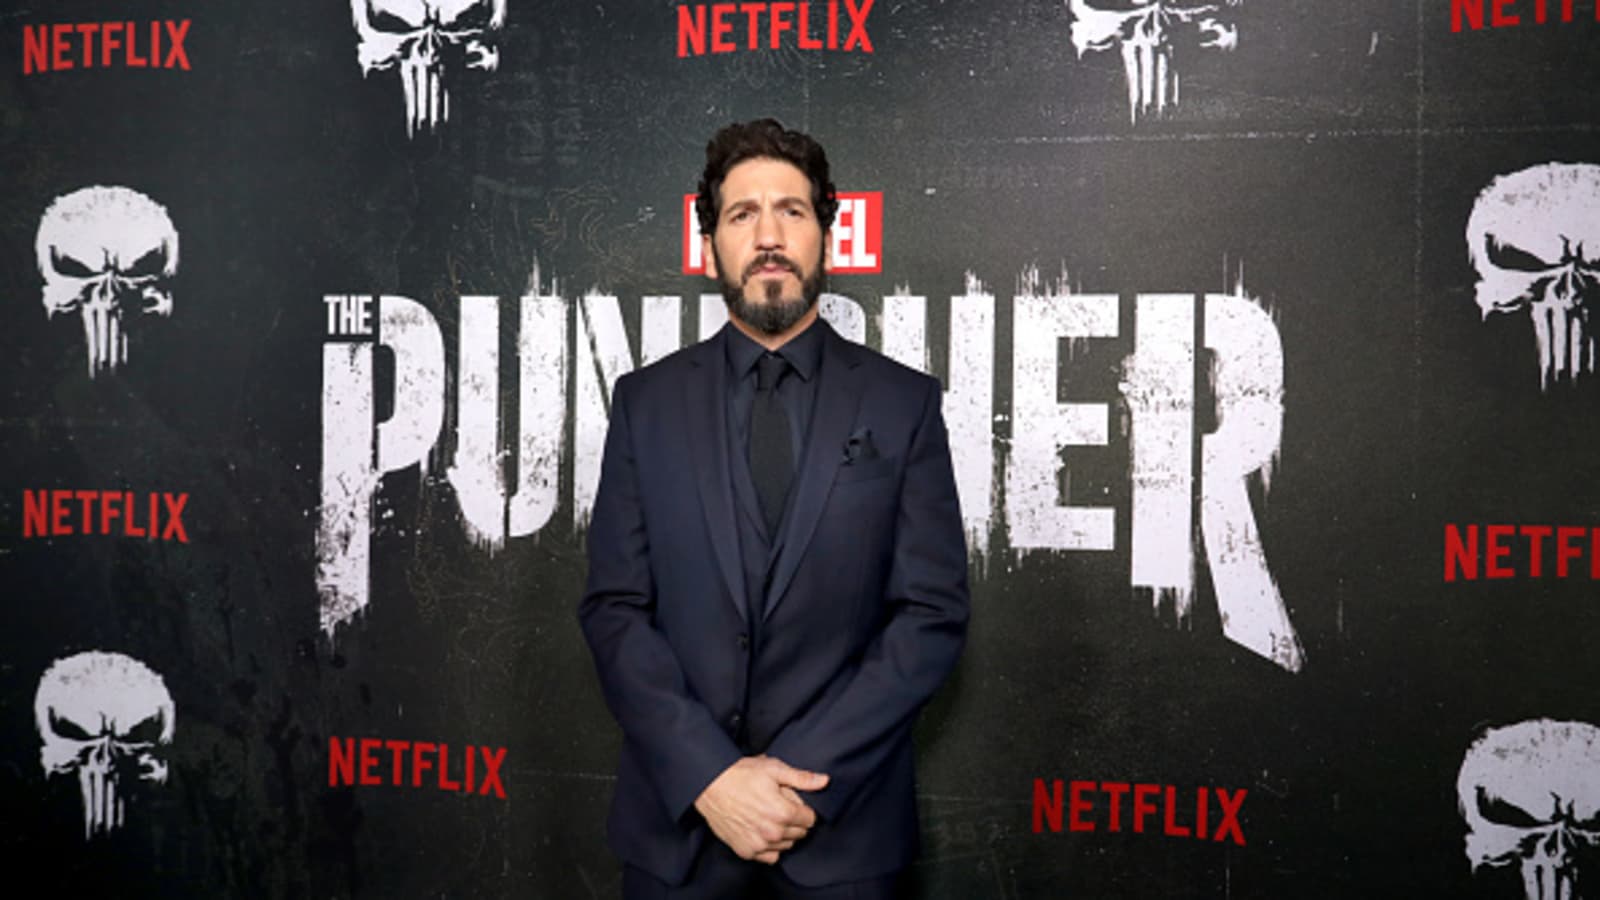 The Punisher' is back on Netflix, but he may not survive 2019